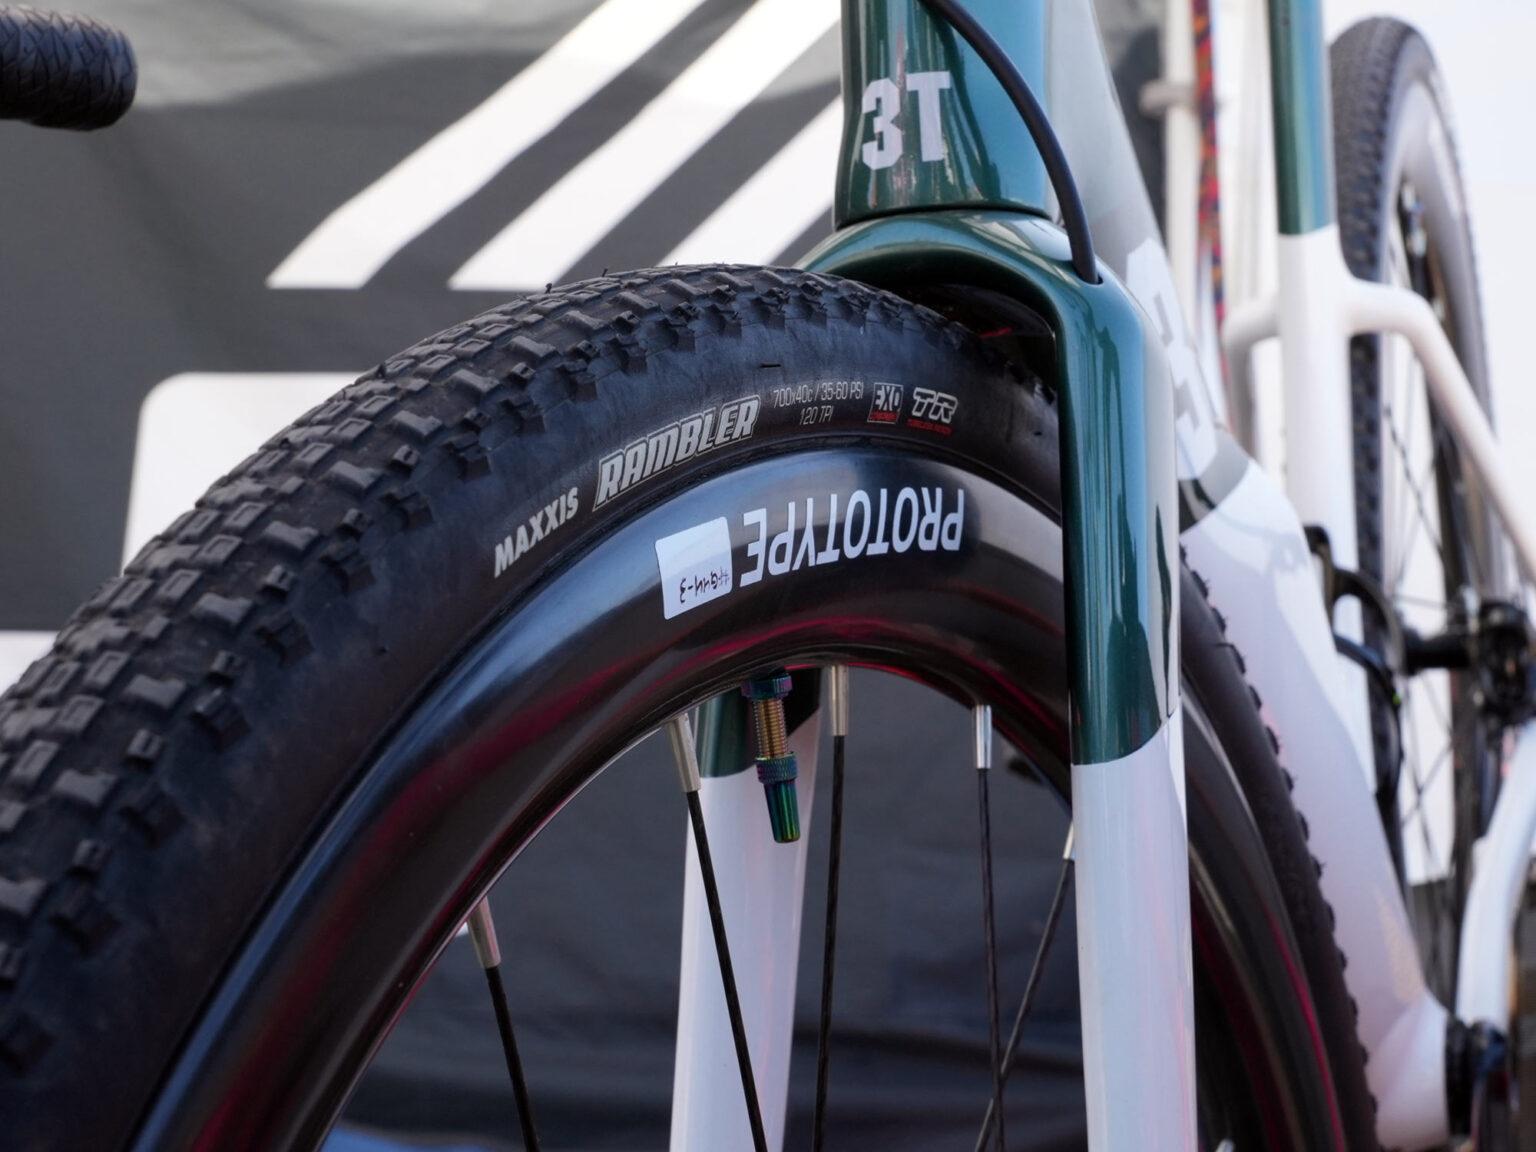 ultra wide gravel wheel prototypes from Gulo Composites